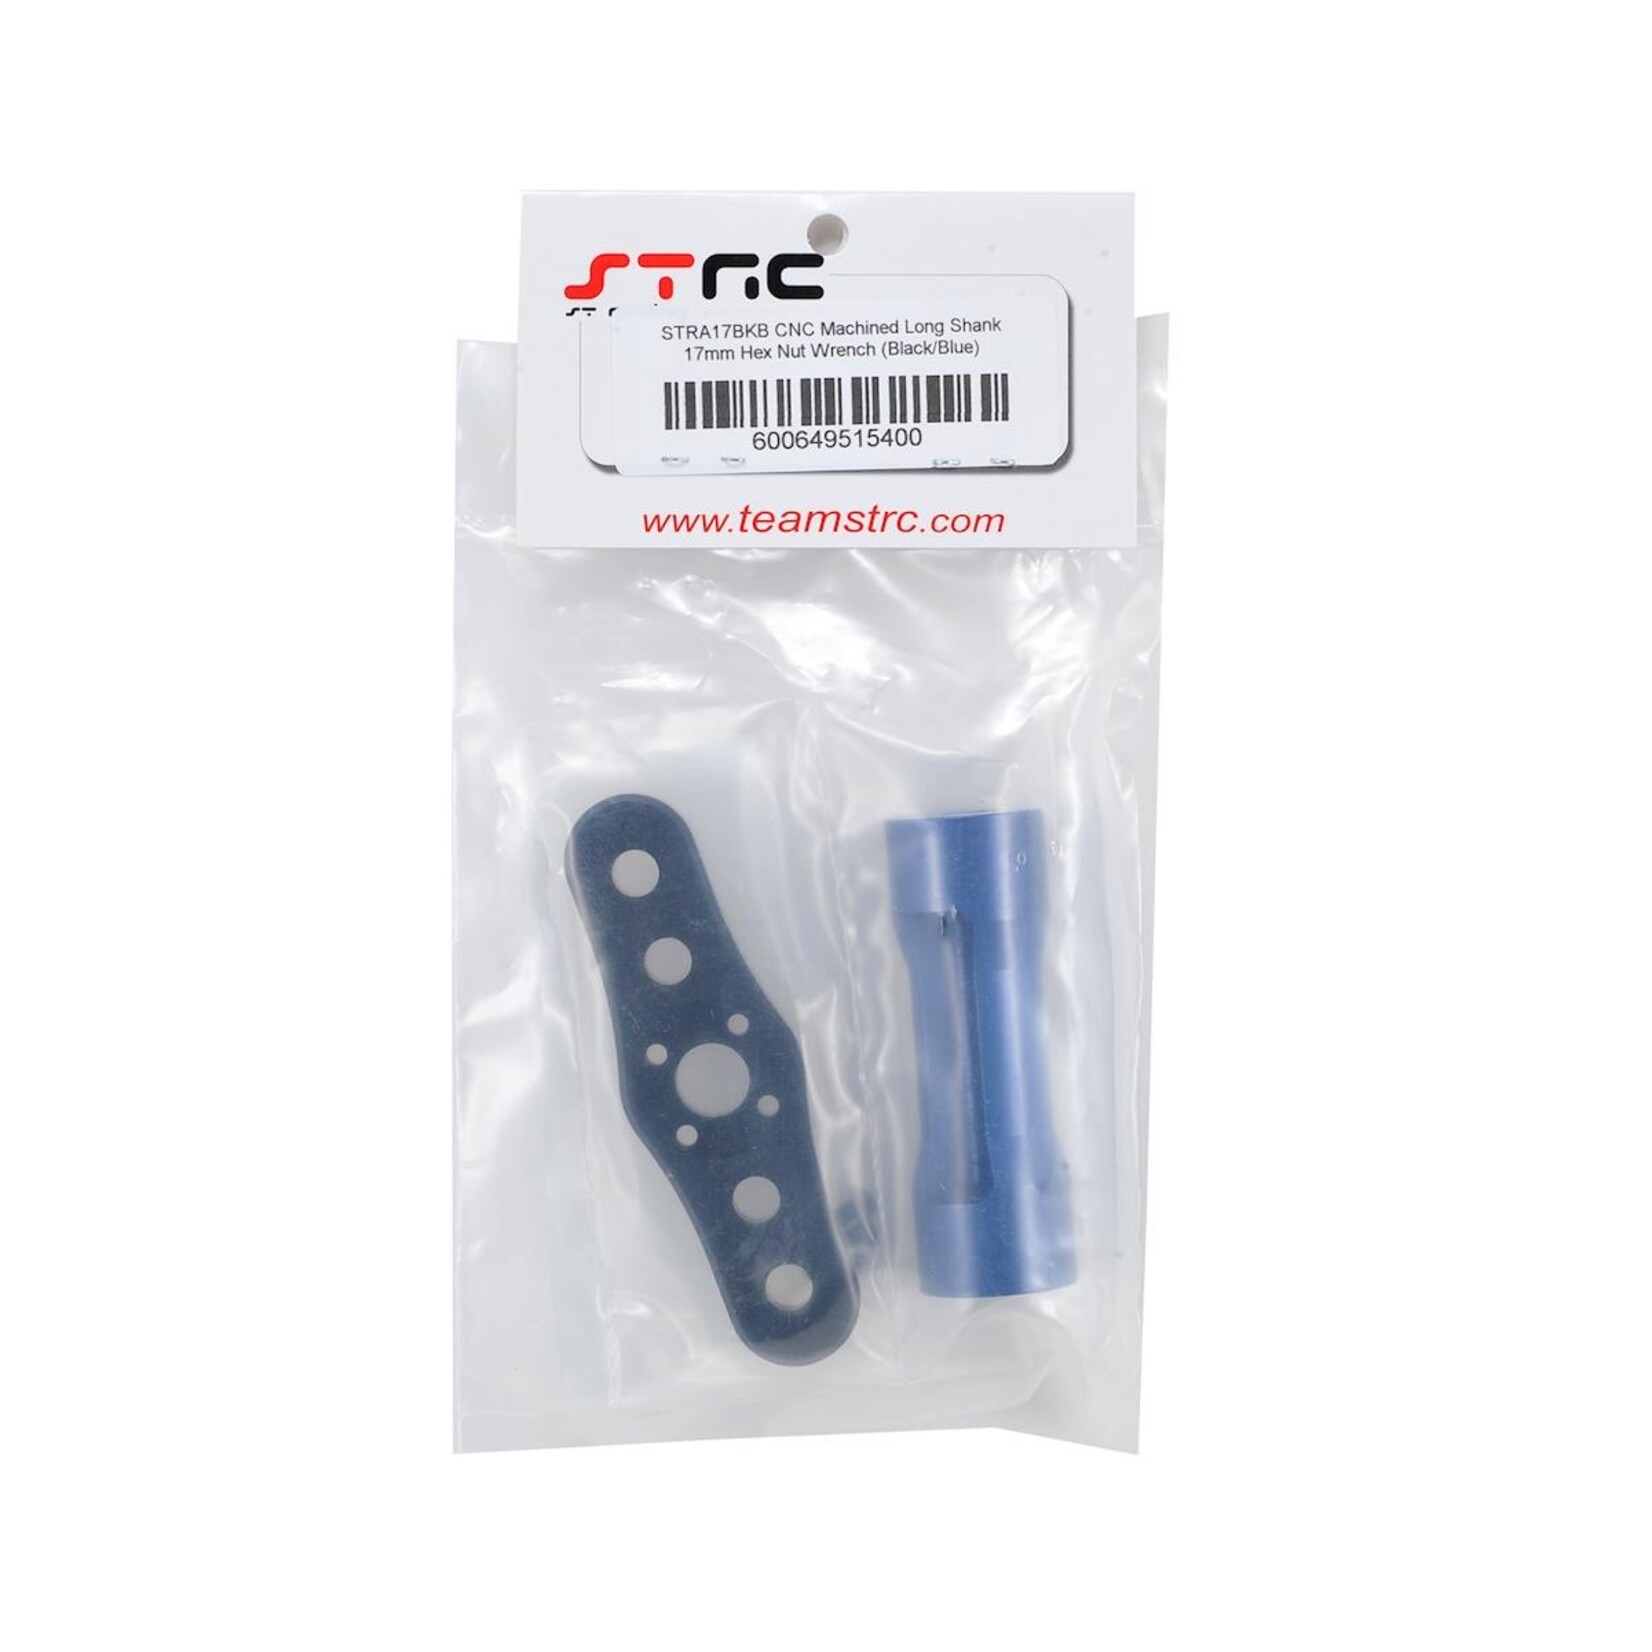 ST Racing Concepts ST Racing Concepts 17mm Light Weight T-Handle Wheel Wrench (Black/Blue) #STRA17BKB